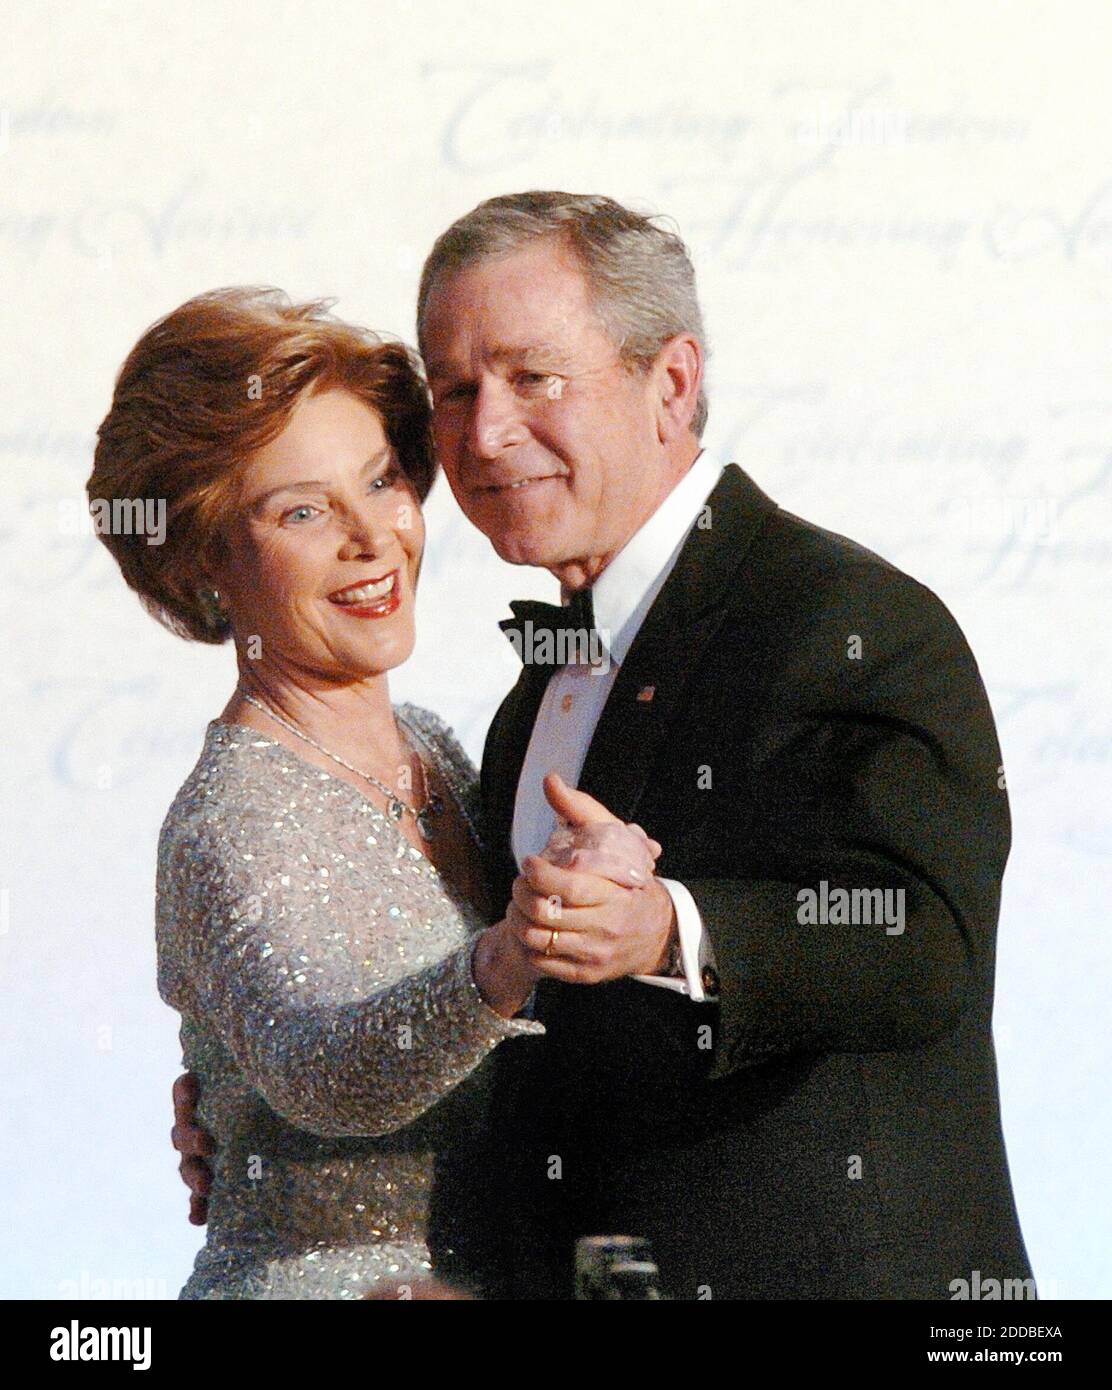 NO FILM, NO VIDEO, NO TV, NO DOCUMENTARY - President George W. Bush and first lady Laura Bush dance at the Constitution Ball, part of the inauguration festivities in Washington, DC, USA, on January 20, 2005. Photo by Georges Bridges/US News Story Slugged/KRT/ABACA. Stock Photo